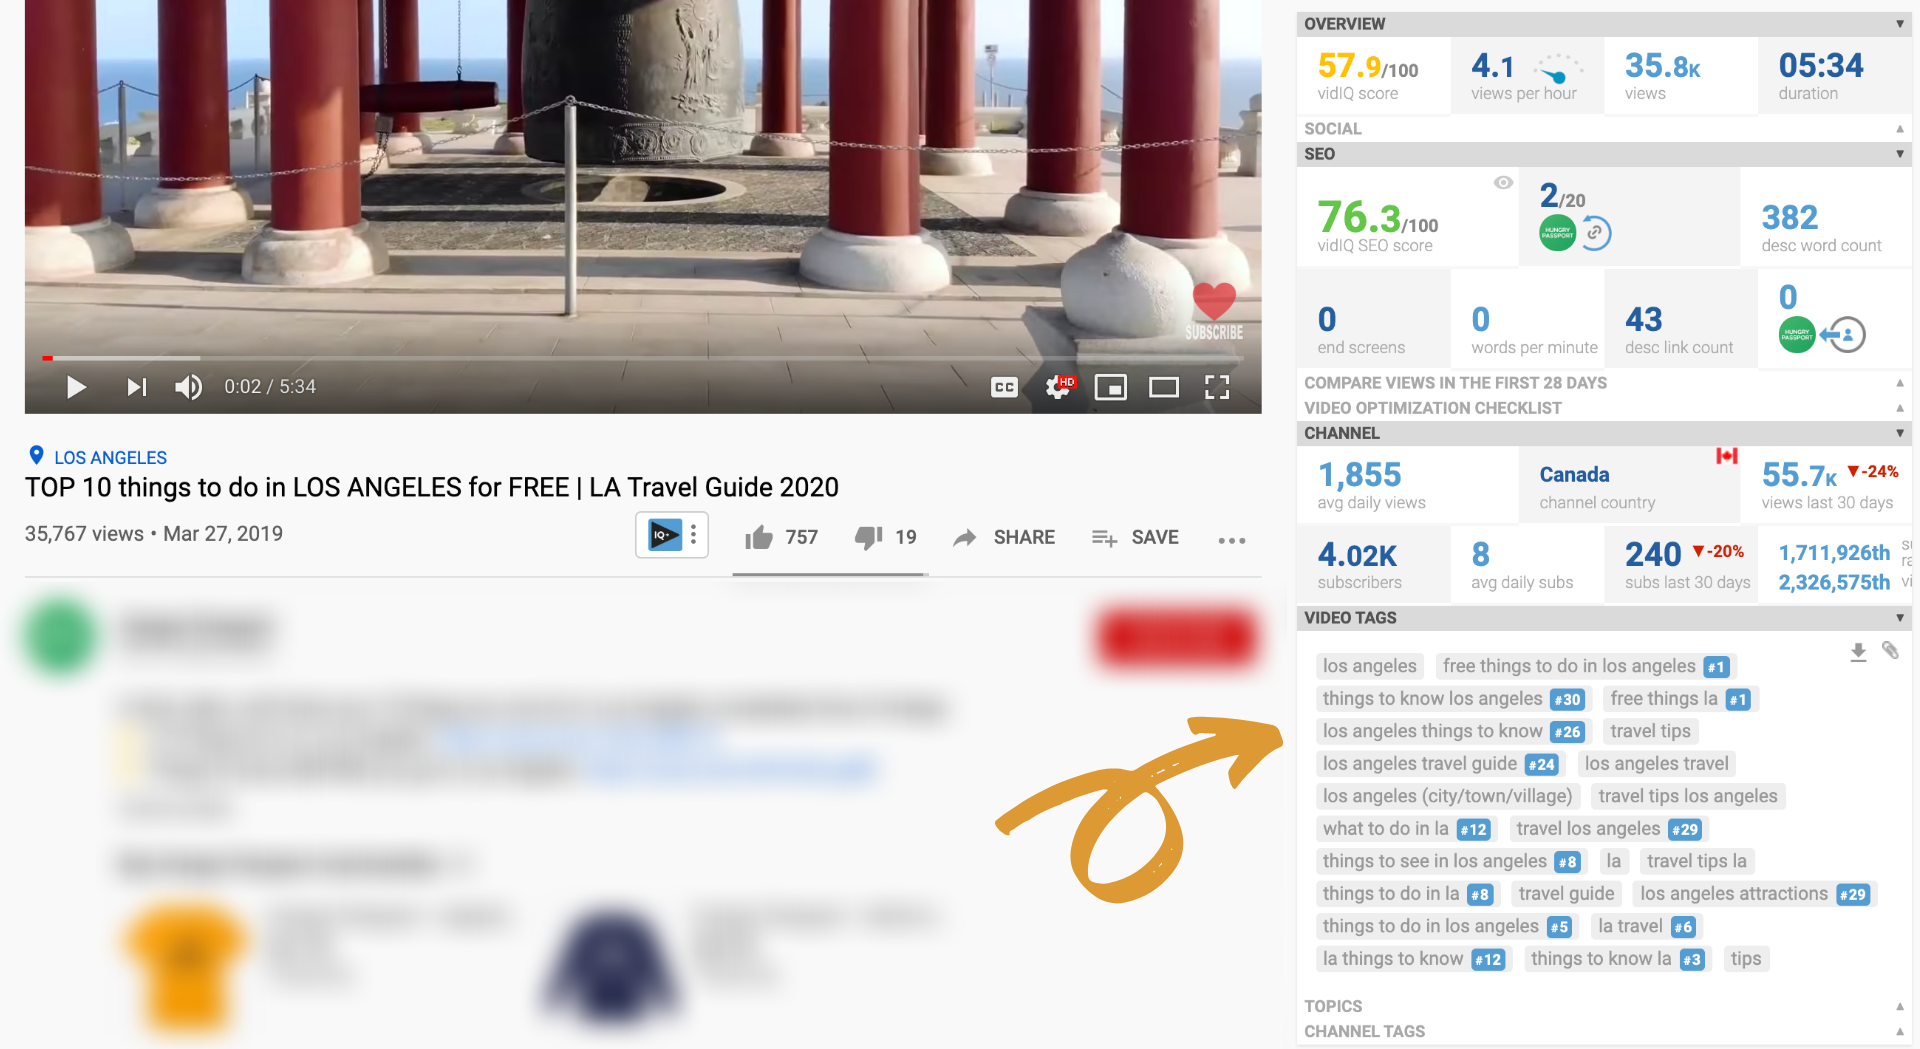 SEO For YouTube: How To Get More Views On YouTube for Free 86